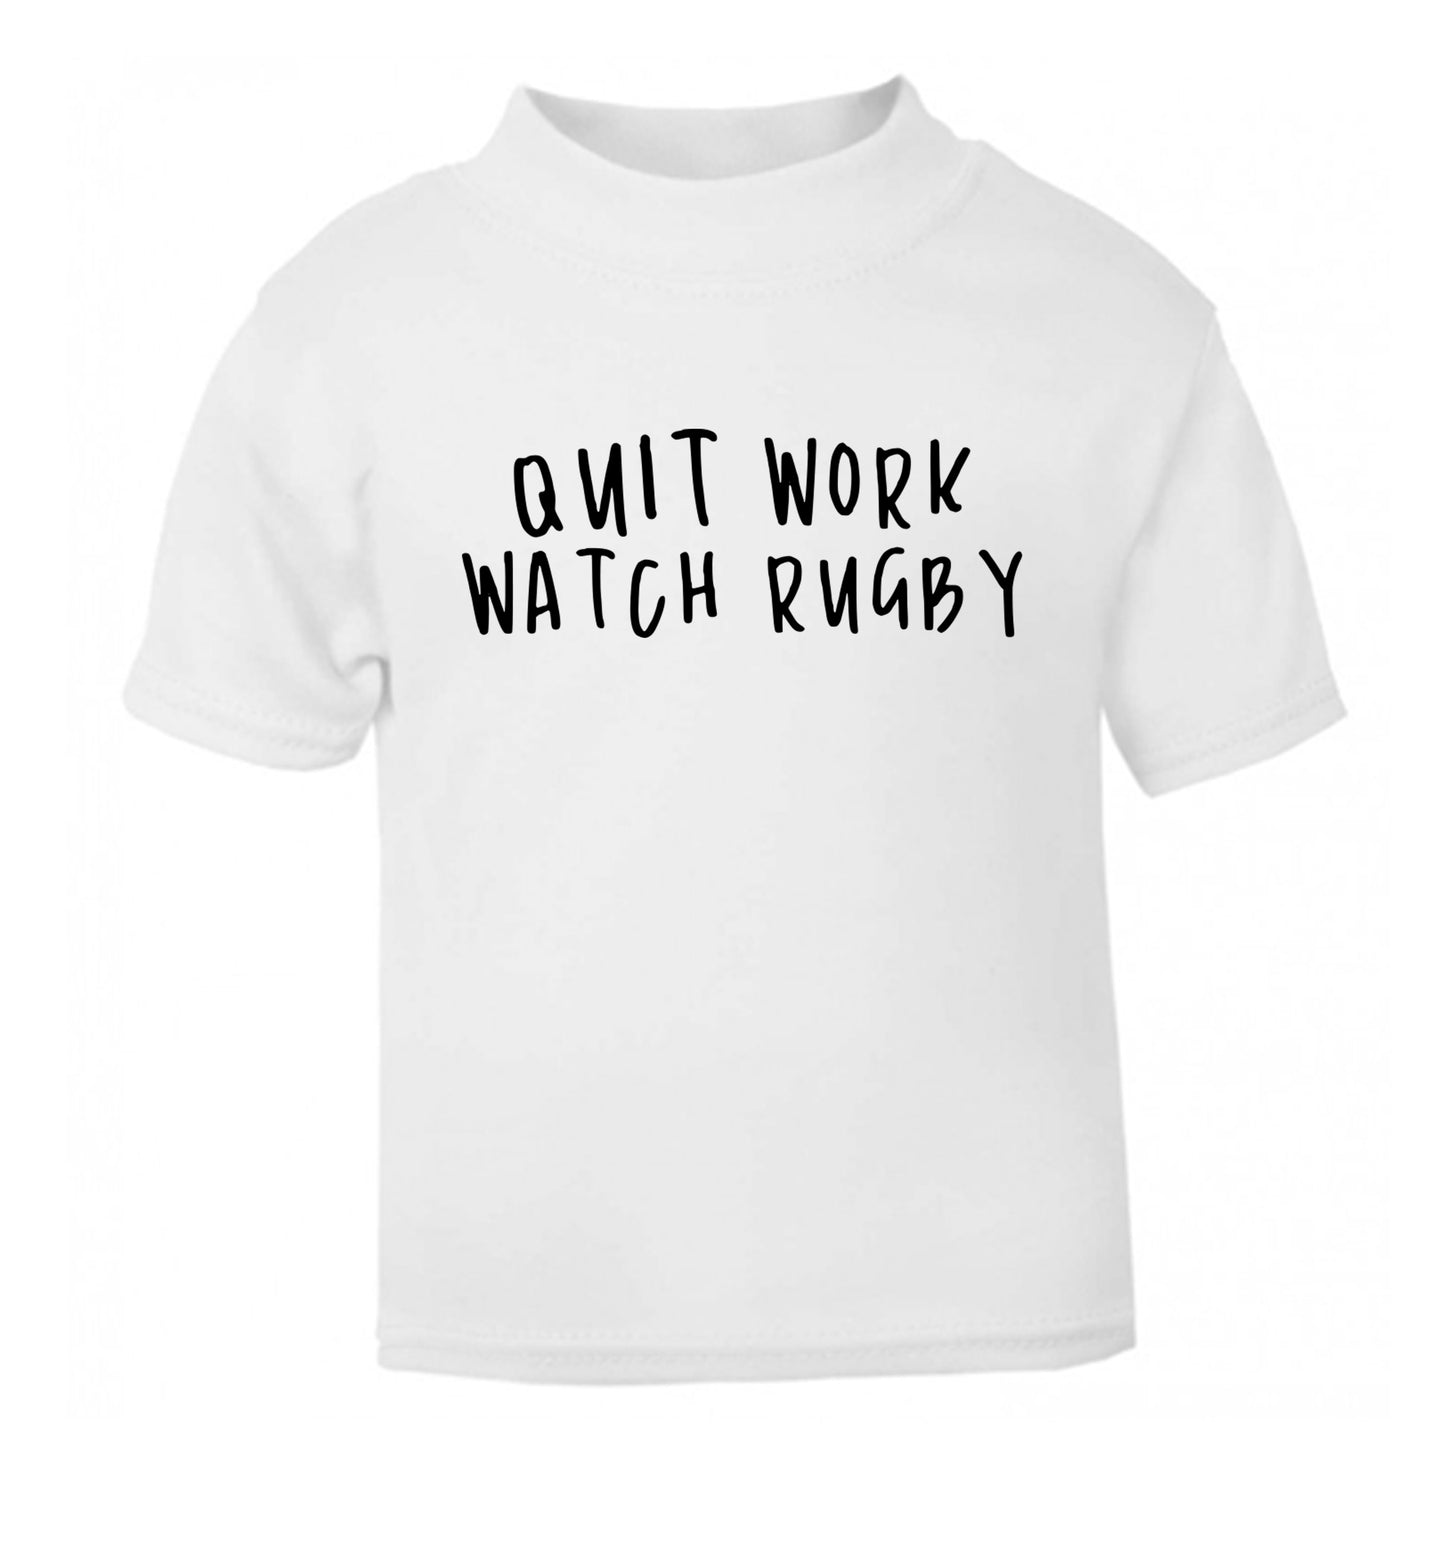 Quit work watch rugby white Baby Toddler Tshirt 2 Years